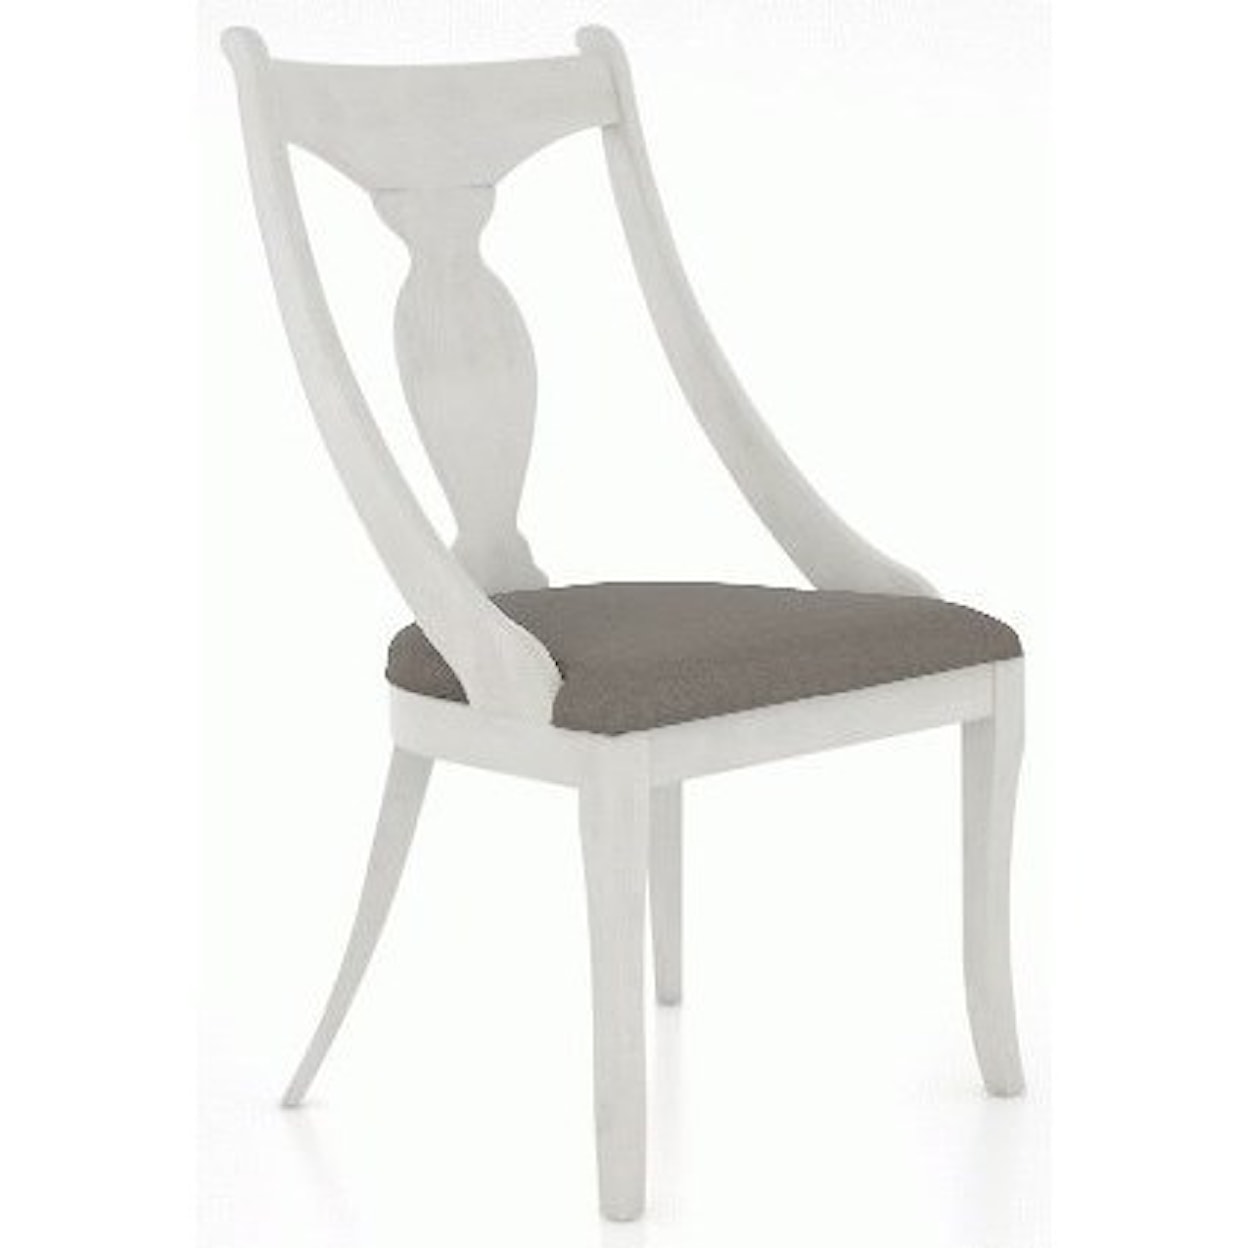 Canadel Farmhouse Customizable Chair with Upholstered Seat